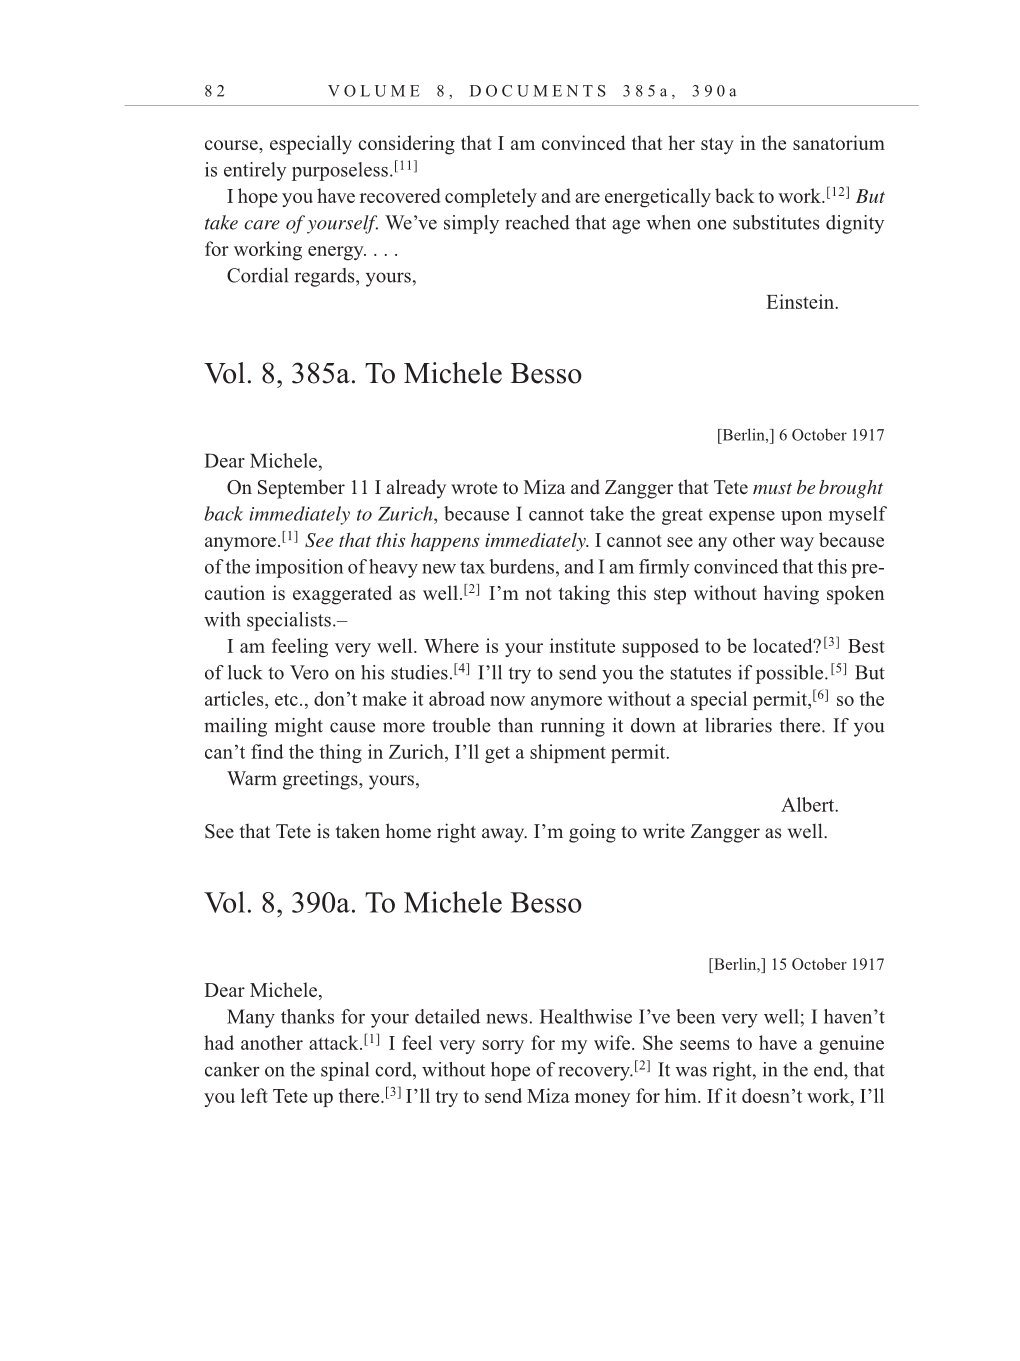 Volume 10: The Berlin Years: Correspondence, May-December 1920, and Supplementary Correspondence, 1909-1920 (English translation supplement) page 82